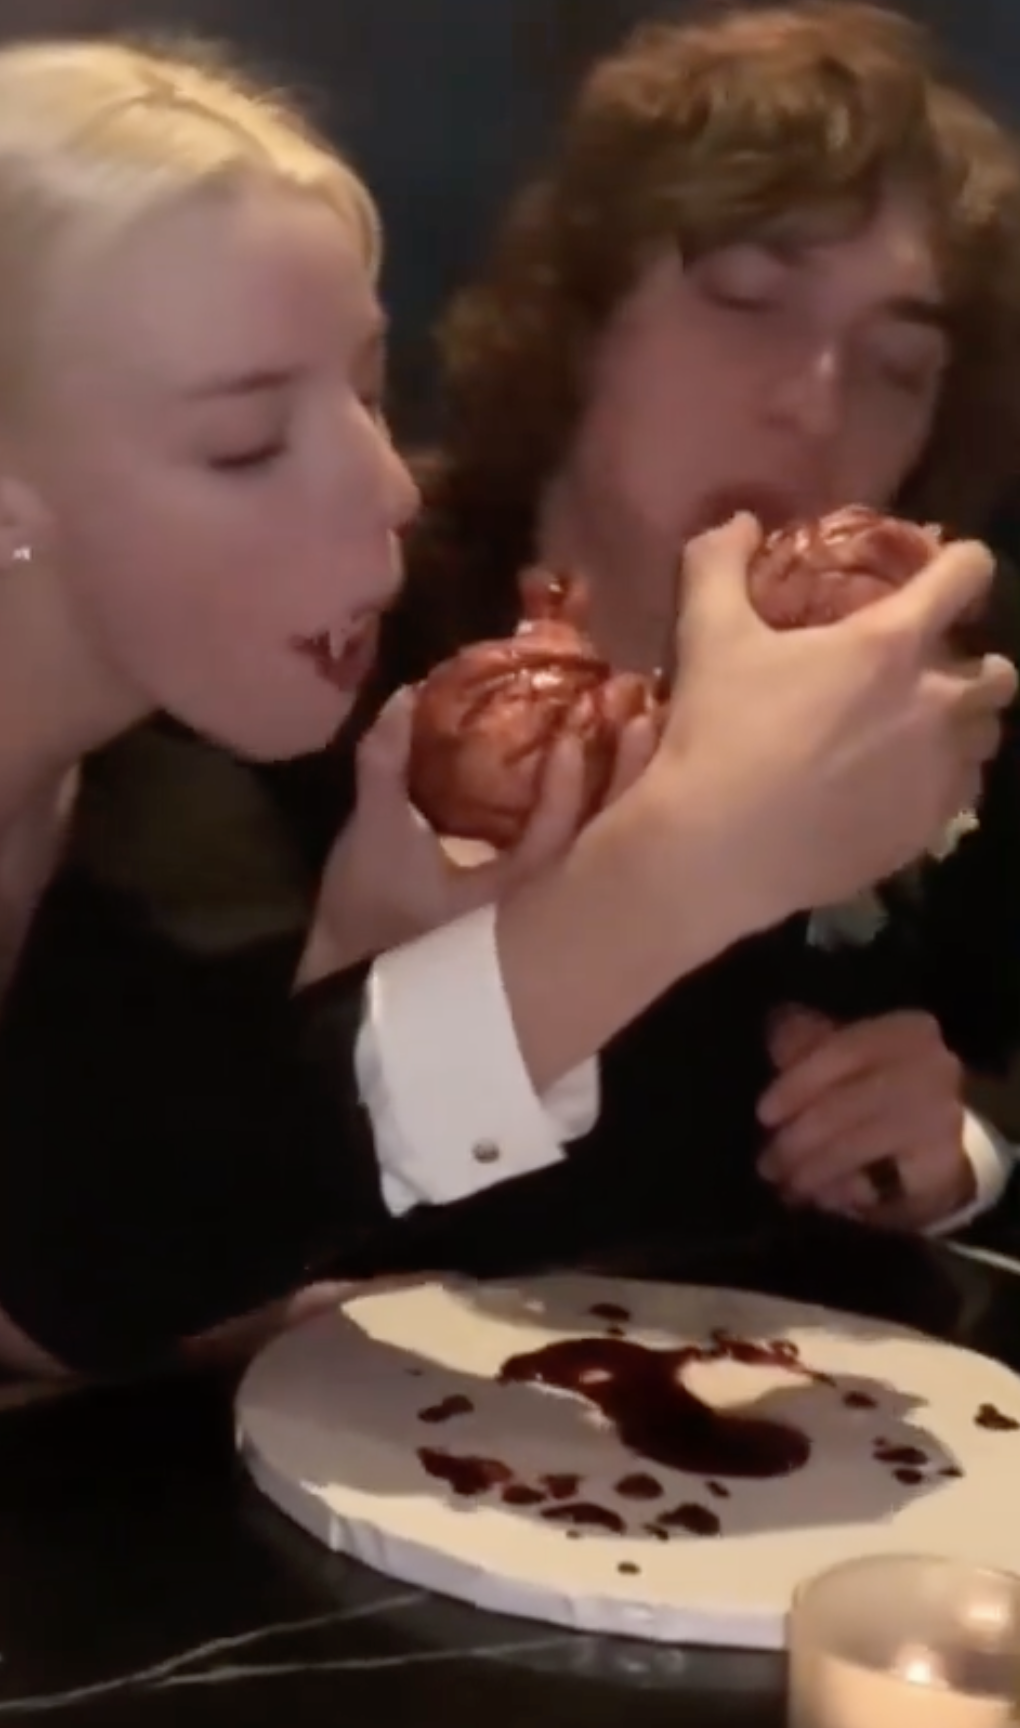 Two people eagerly biting into a shared dessert, messy with chocolate